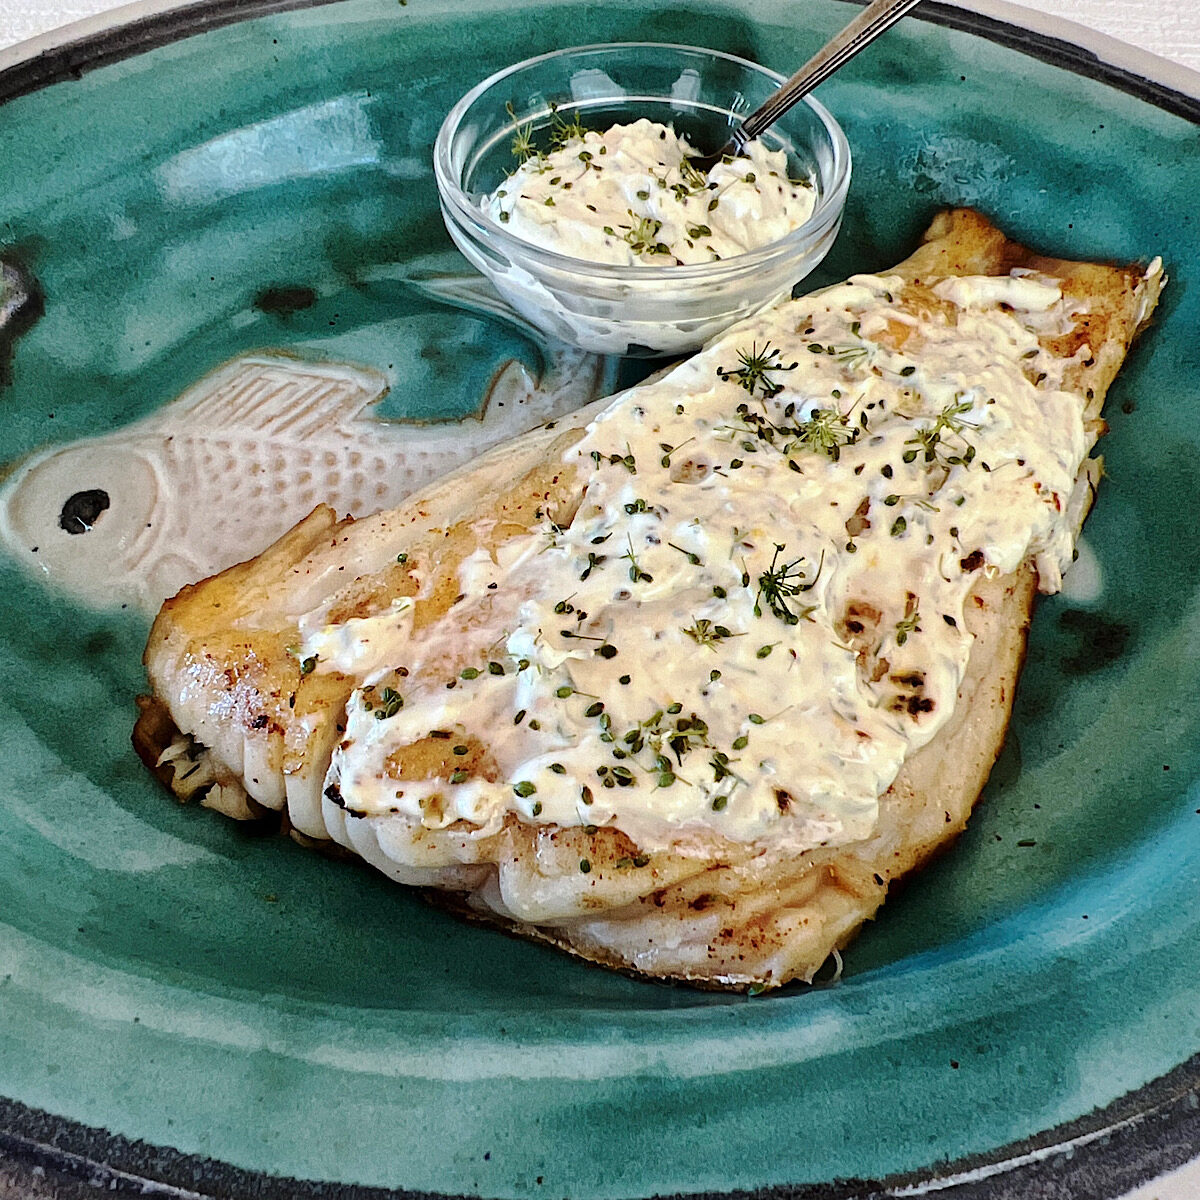 Filet of red snapper with sour cream dill sauce on a blue plate with a side of sauce in a small glass bowl.